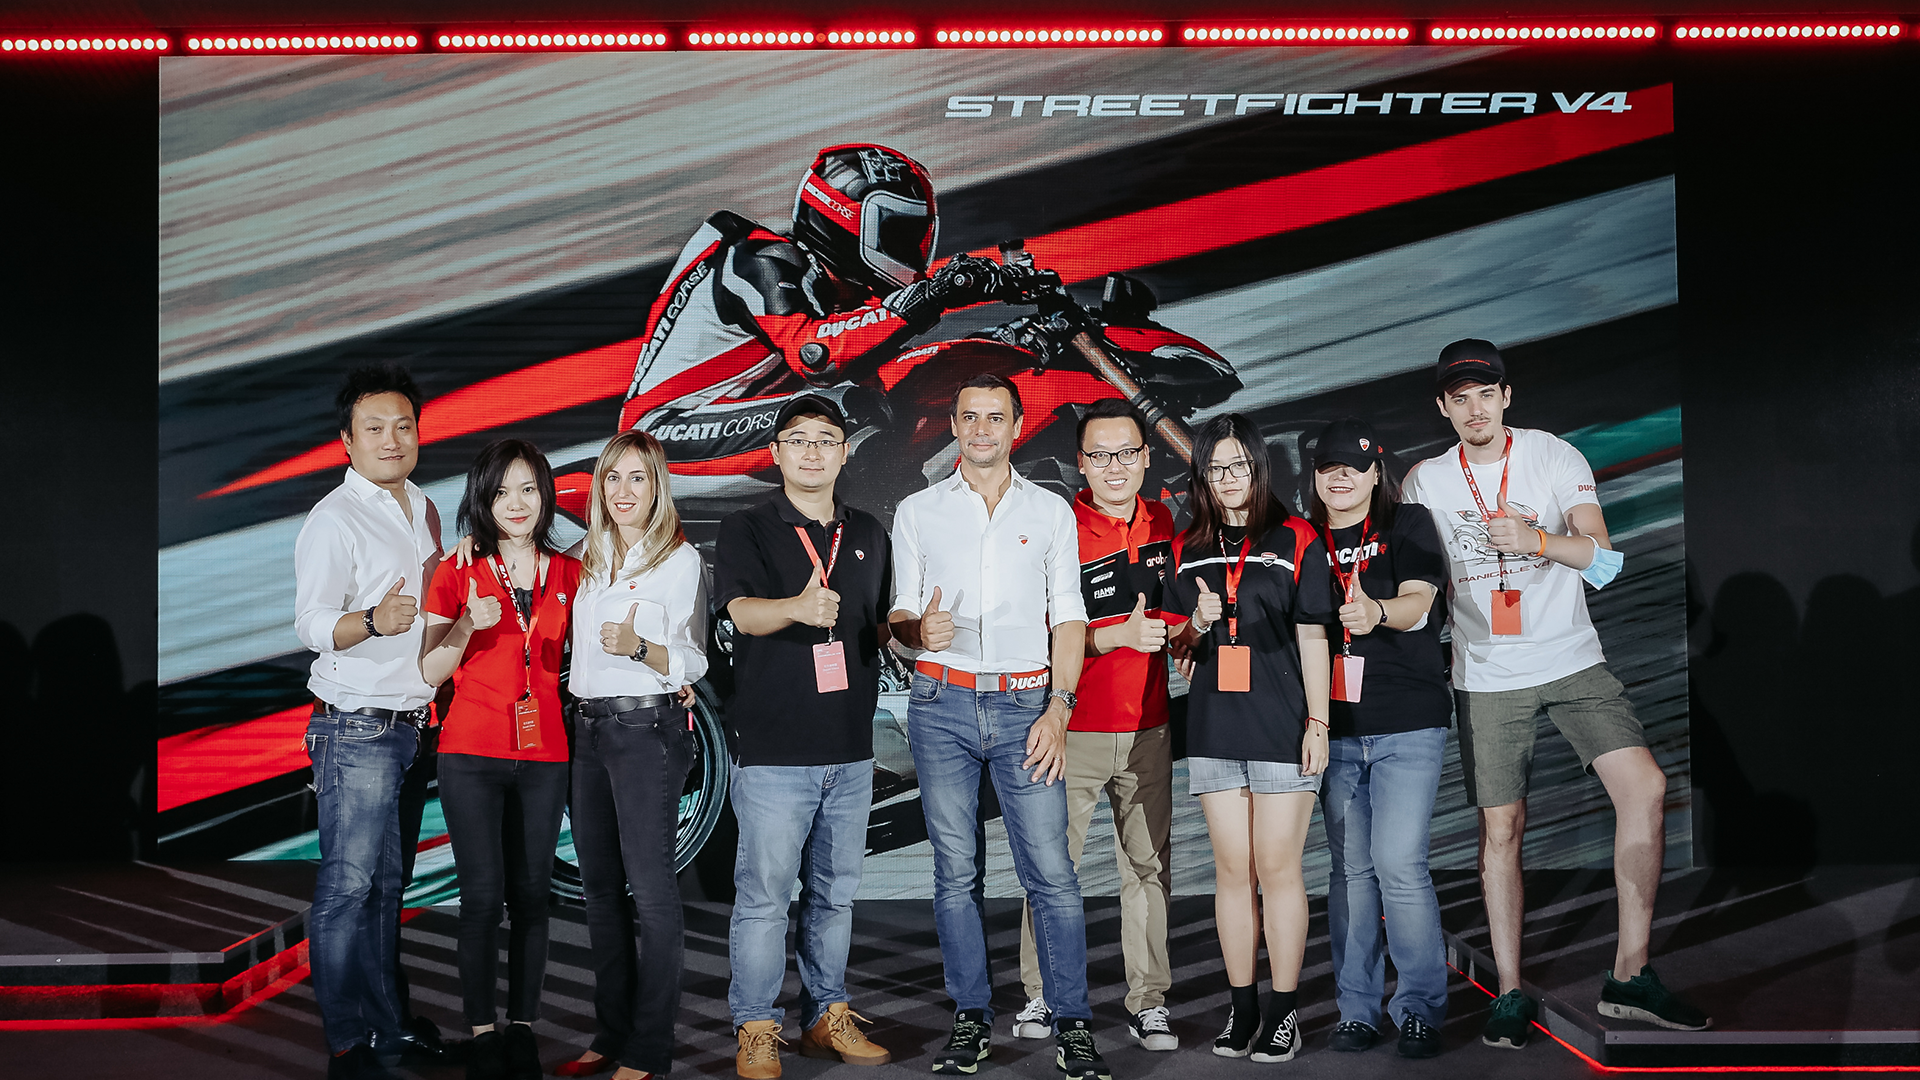 Ducati Streetfighter Launch Party